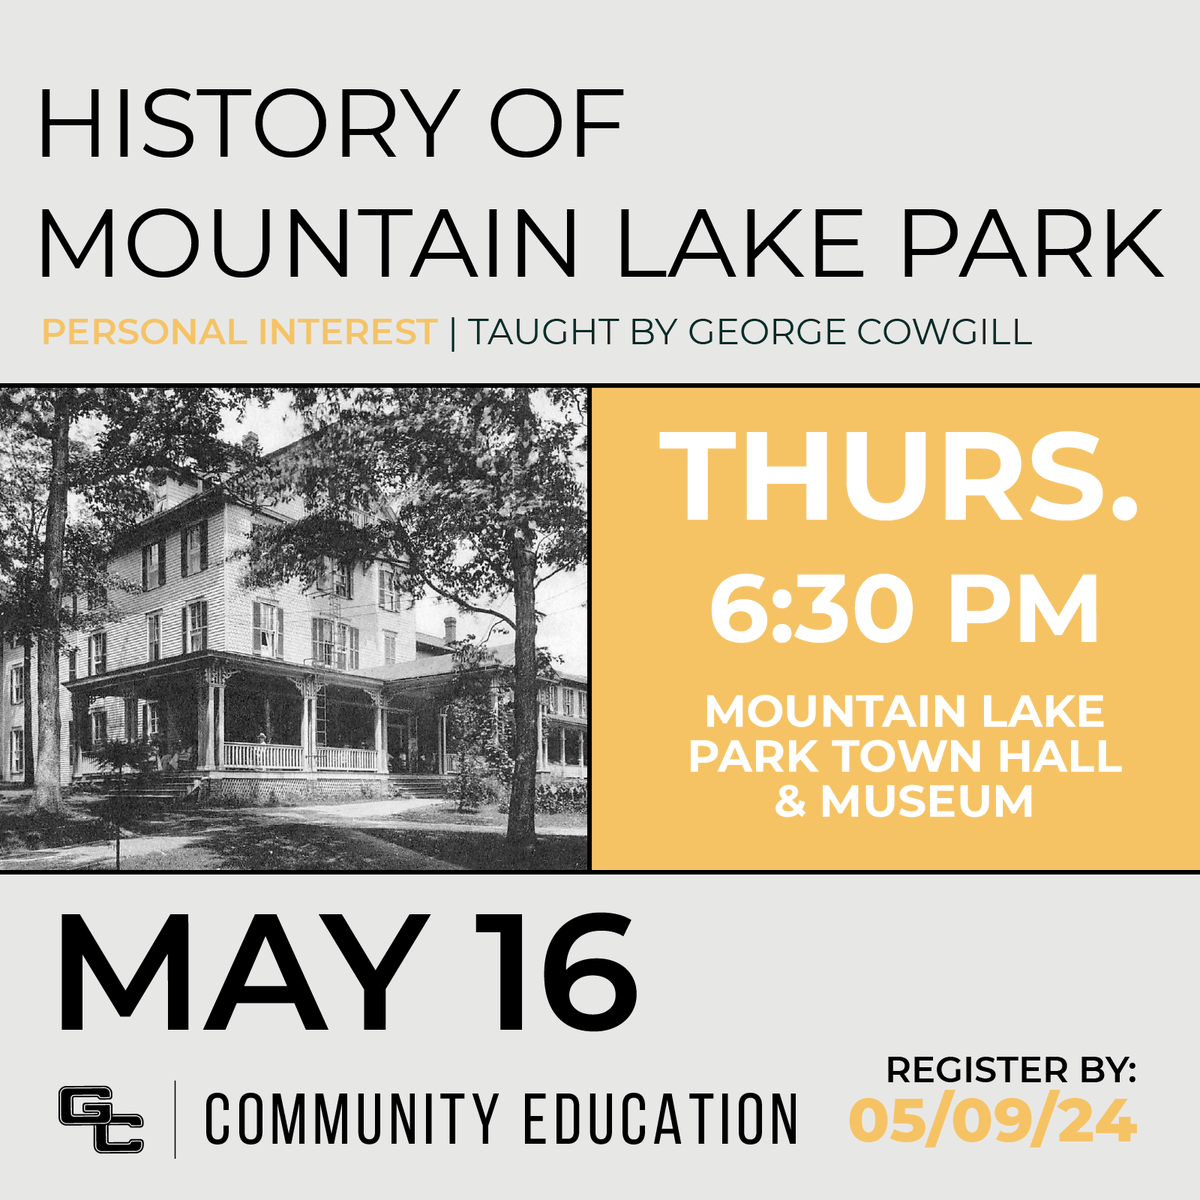 Discover the history of Mountain Lake Park, Maryland with historian George Cowgill. Registration ends soon for classes starting on May 16. Apply now at bit.ly/ce-HistoryMLP 

#History #MountainChautauqua #GarrettCollege #MtLakePark